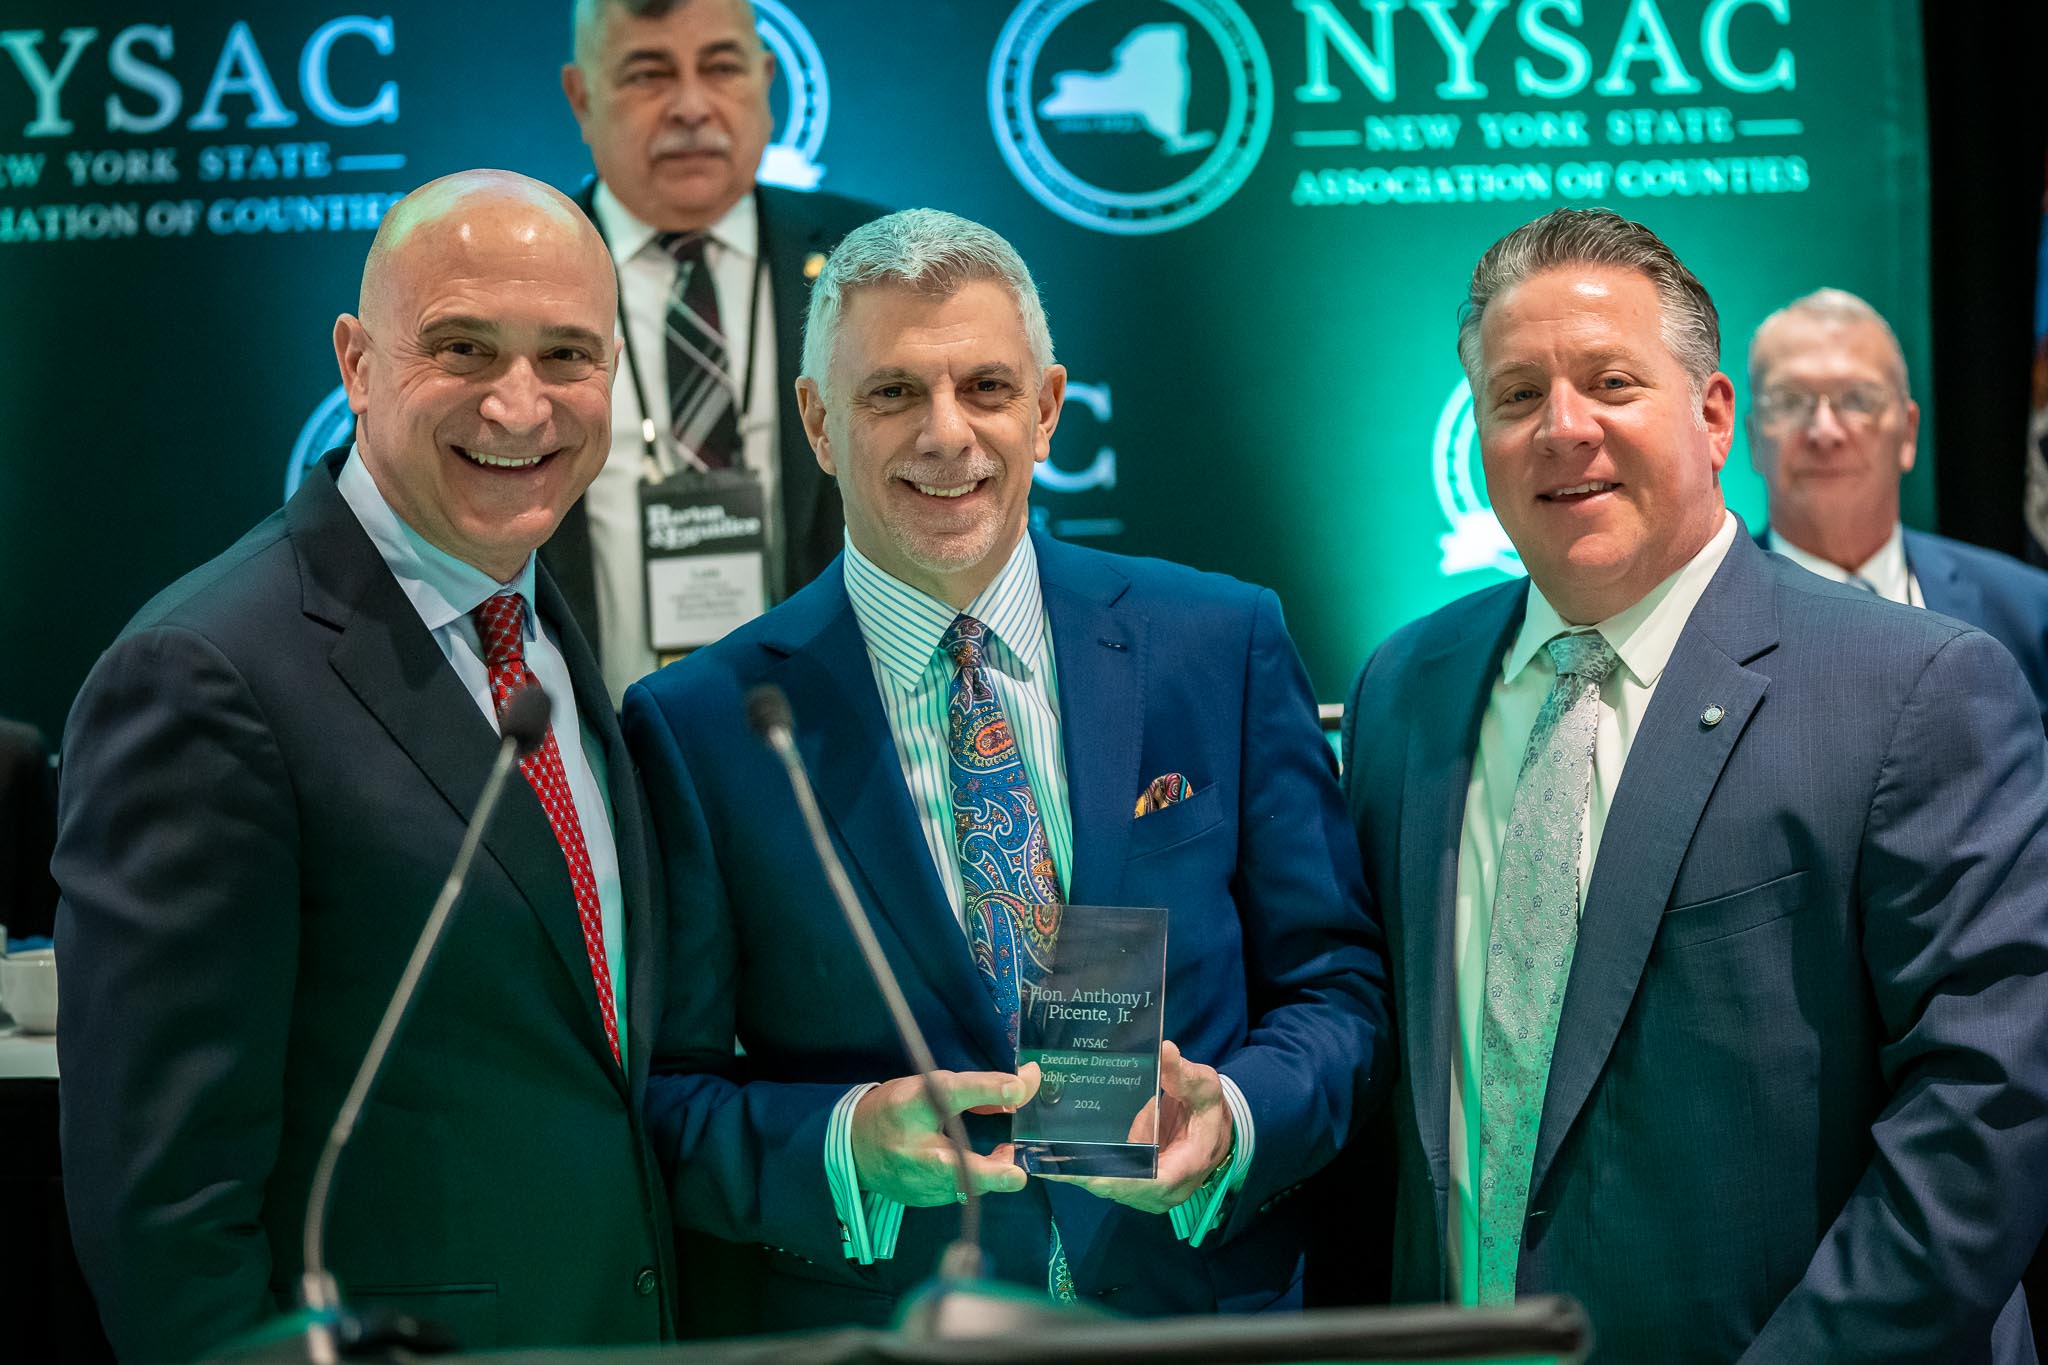 Image of Oneida County Executive Honored with NYSAC Public Service Award